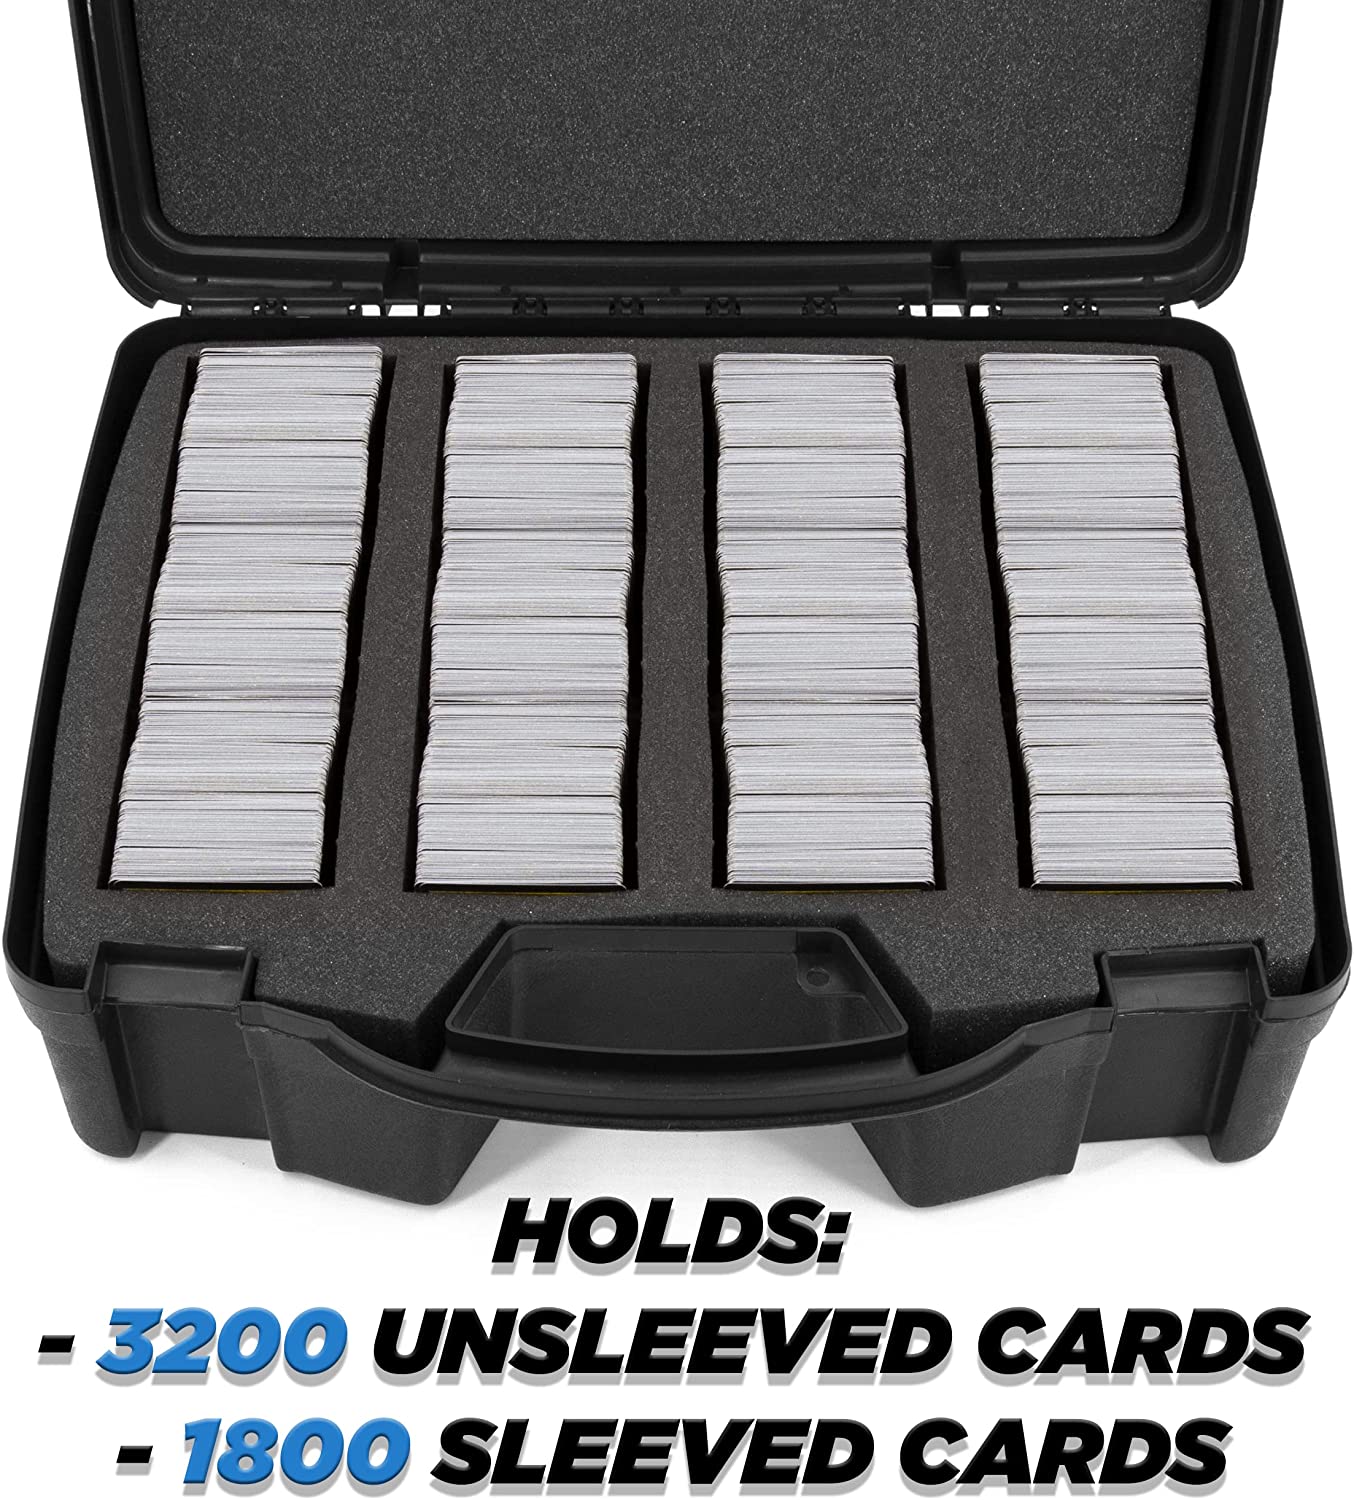 CASEMATIX Trading Card Case and Card Game Organizer for 3200 Cards - 16  Hard Shell Card Case Holder for Trading Cards with 40 Dividers